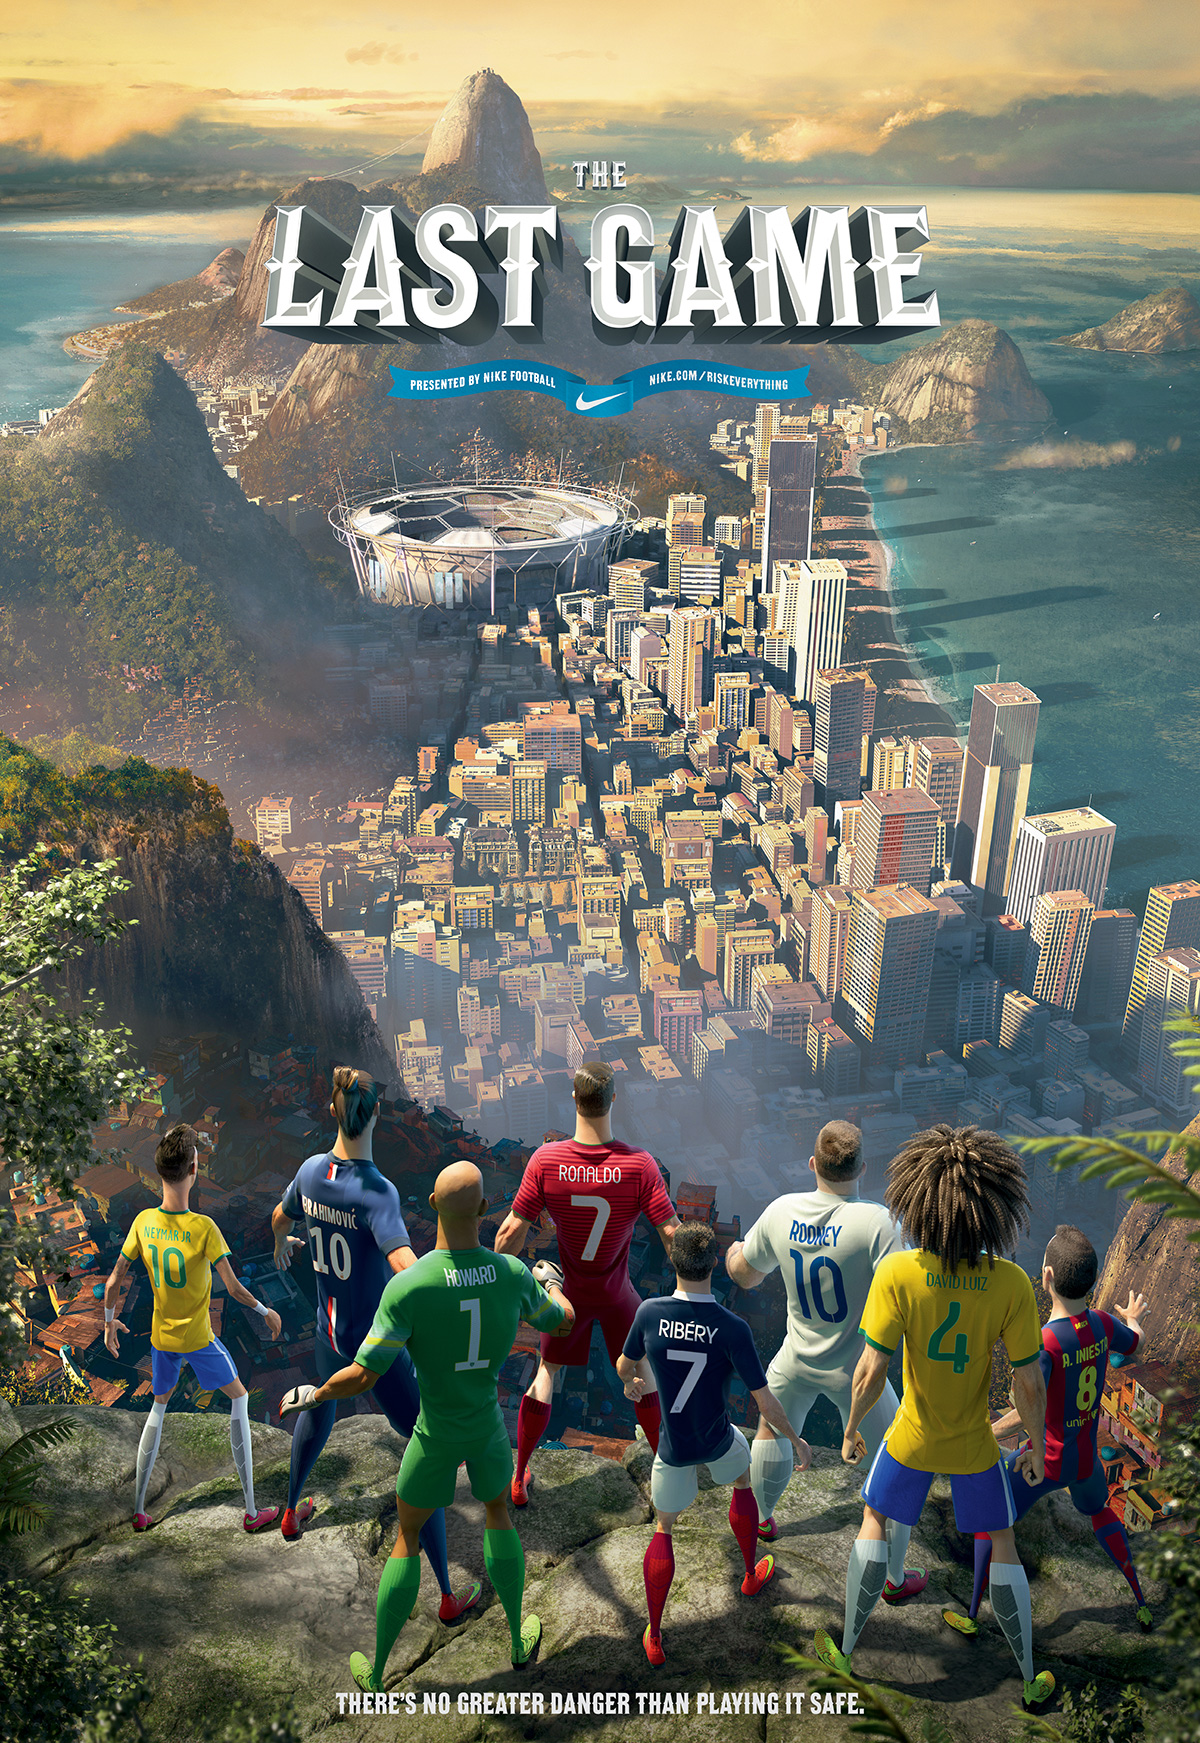 The Last Game - Nike Reklame